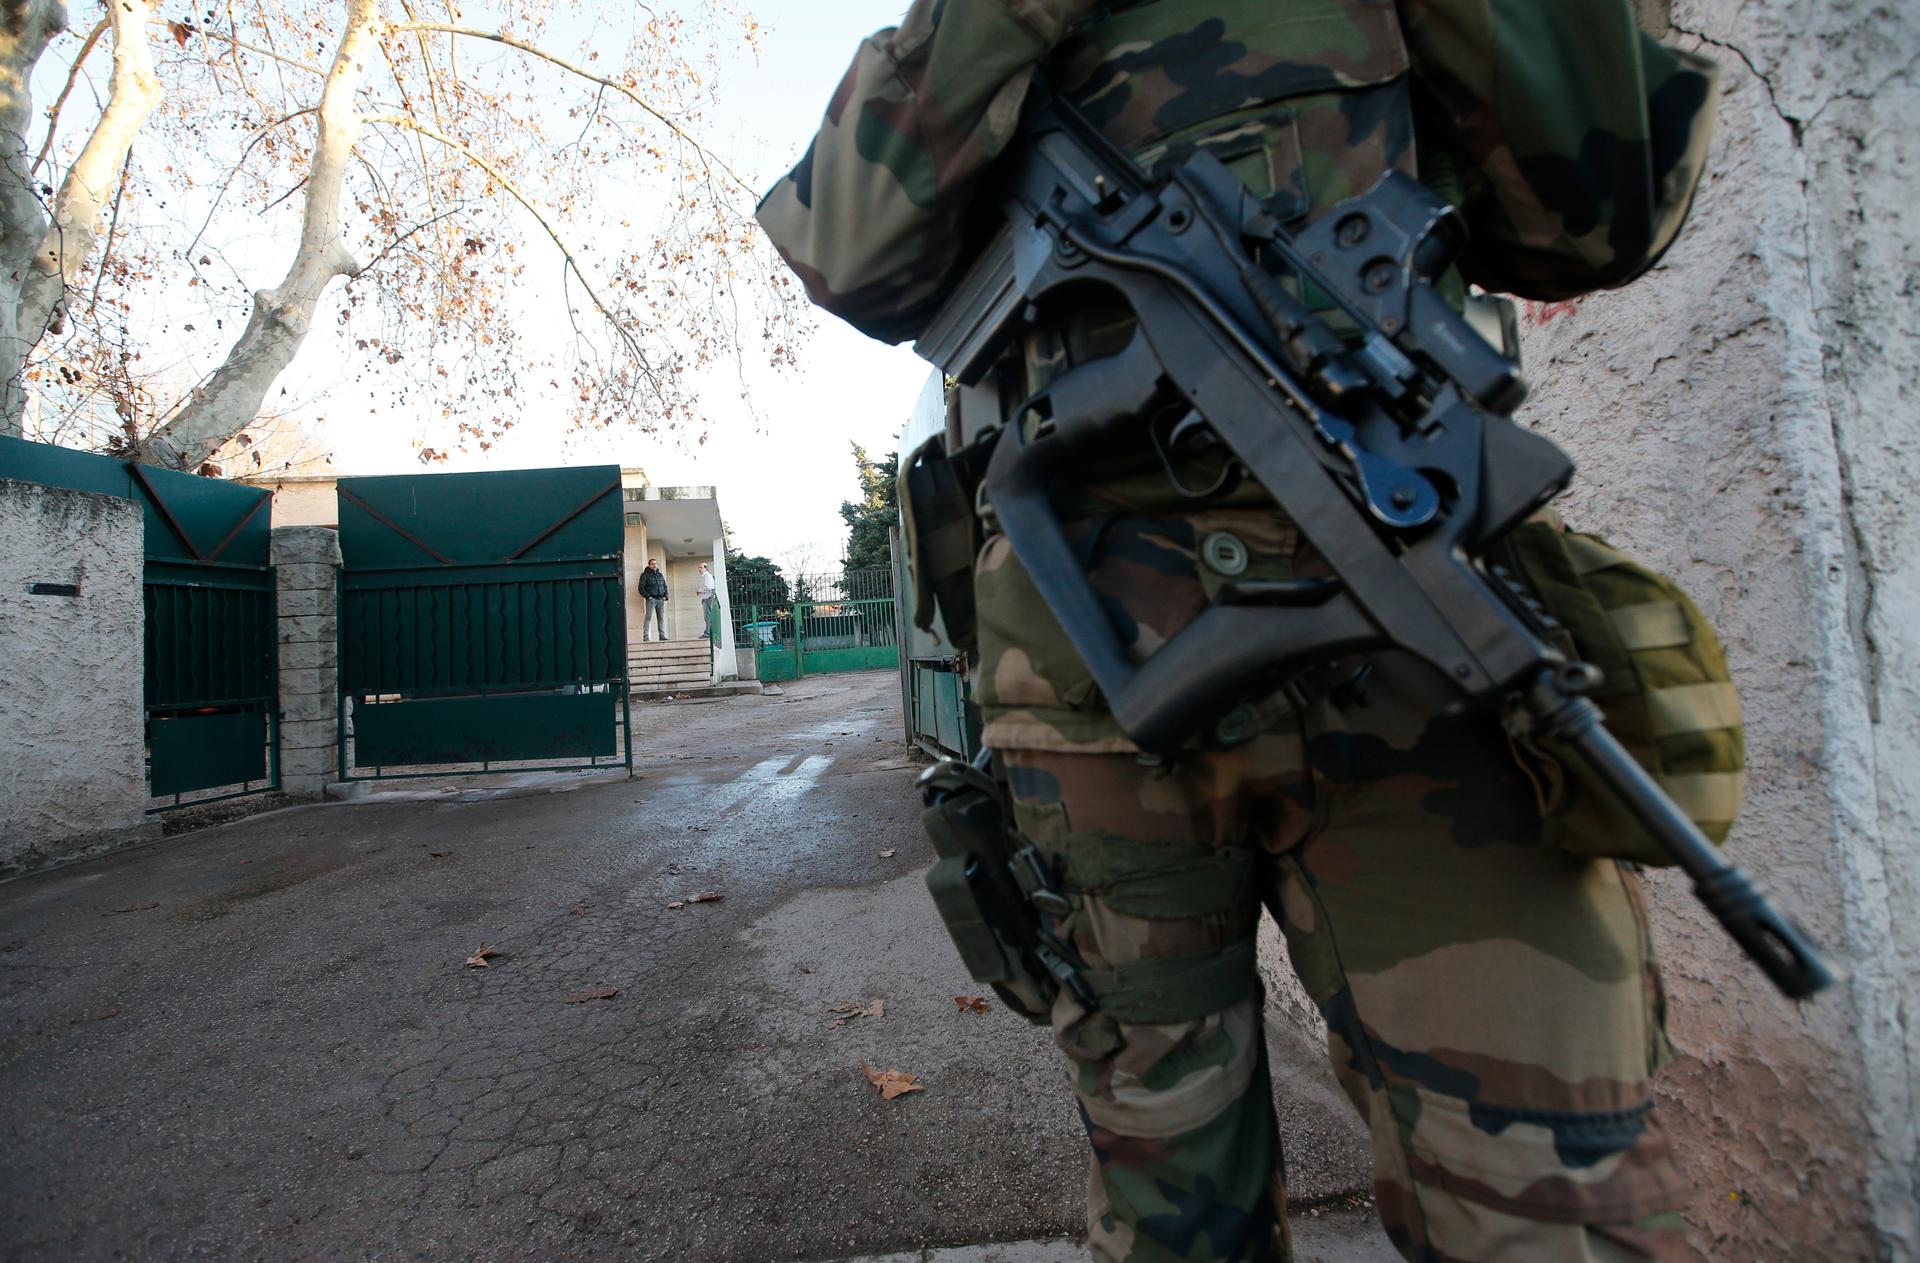 A French soldier secures access to a Jewish school in Marseille, France, January 11, 2016 after a teenager, armed with a machete, slightly wounded a Jewish teacher before being arrested. Armed guards are the new normal for Jewish institutions in France.